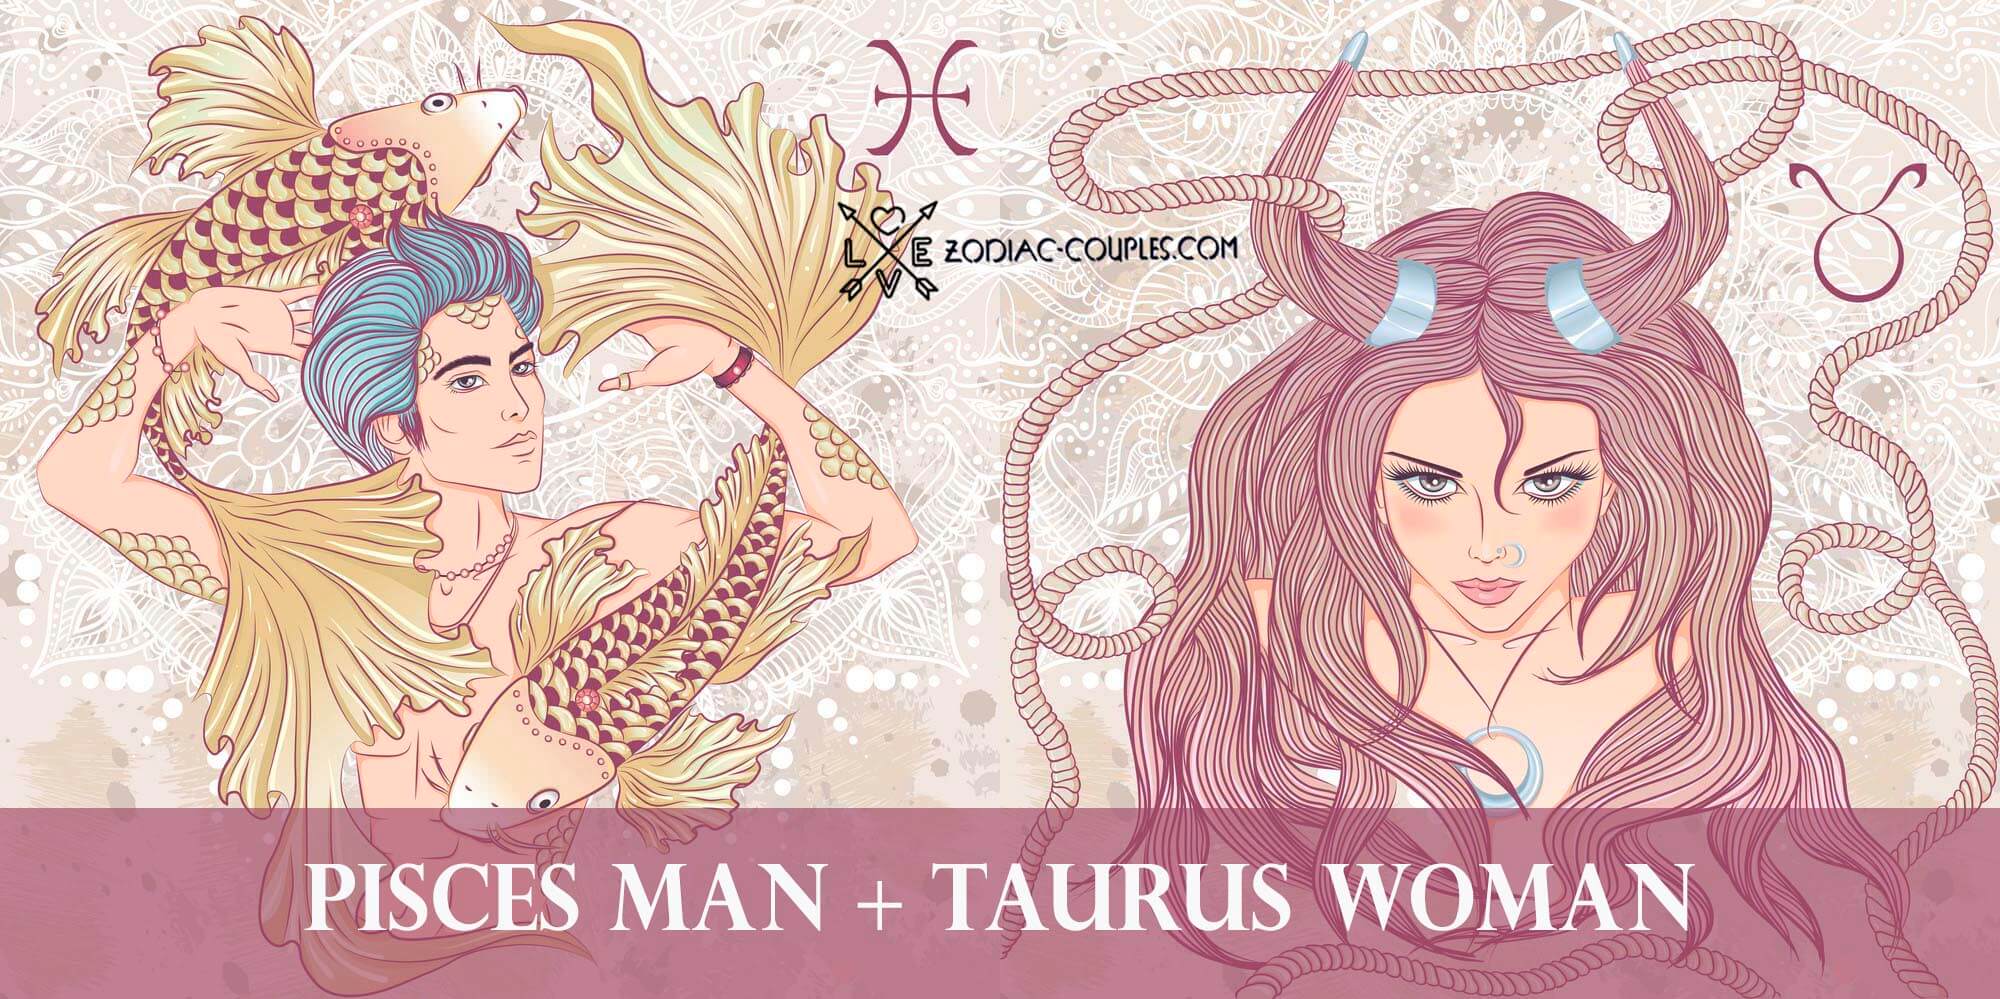 taurus and pieces